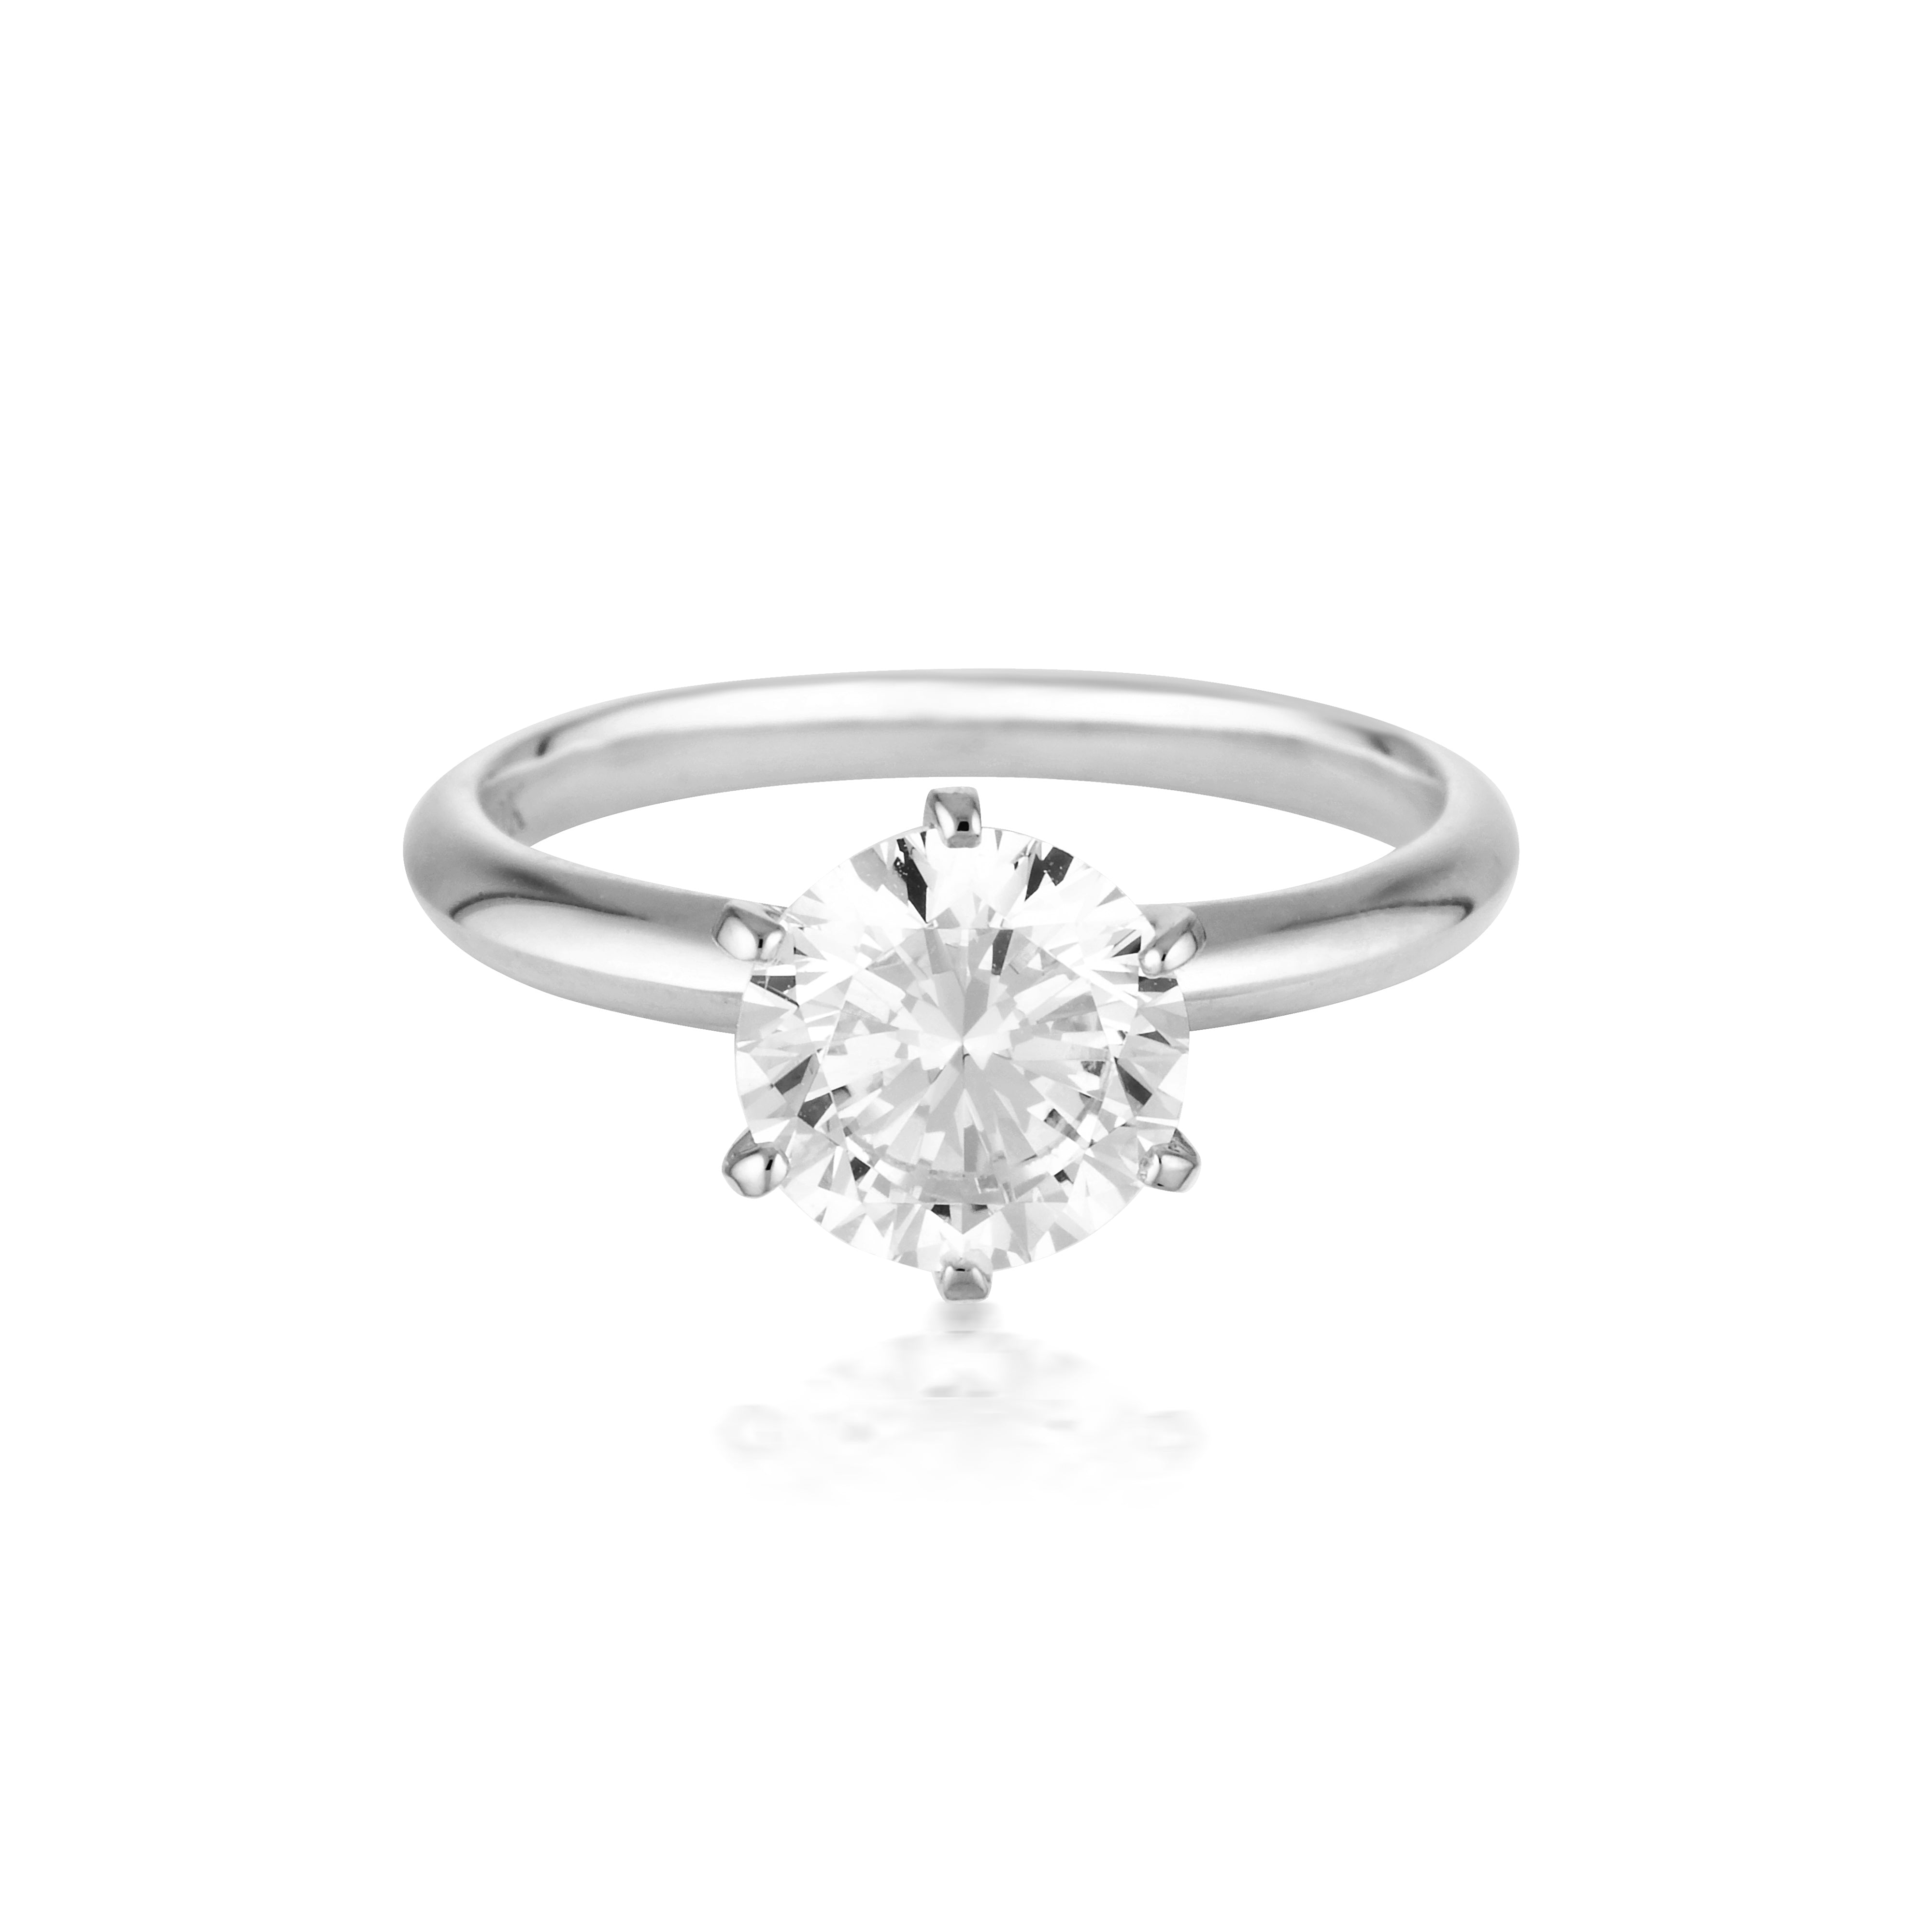 ROUND BRILLIANT CUT 2CT MOISSANITE SOLITAIRE WITH KNIFE EDGE BAND IN WHITE GOLD